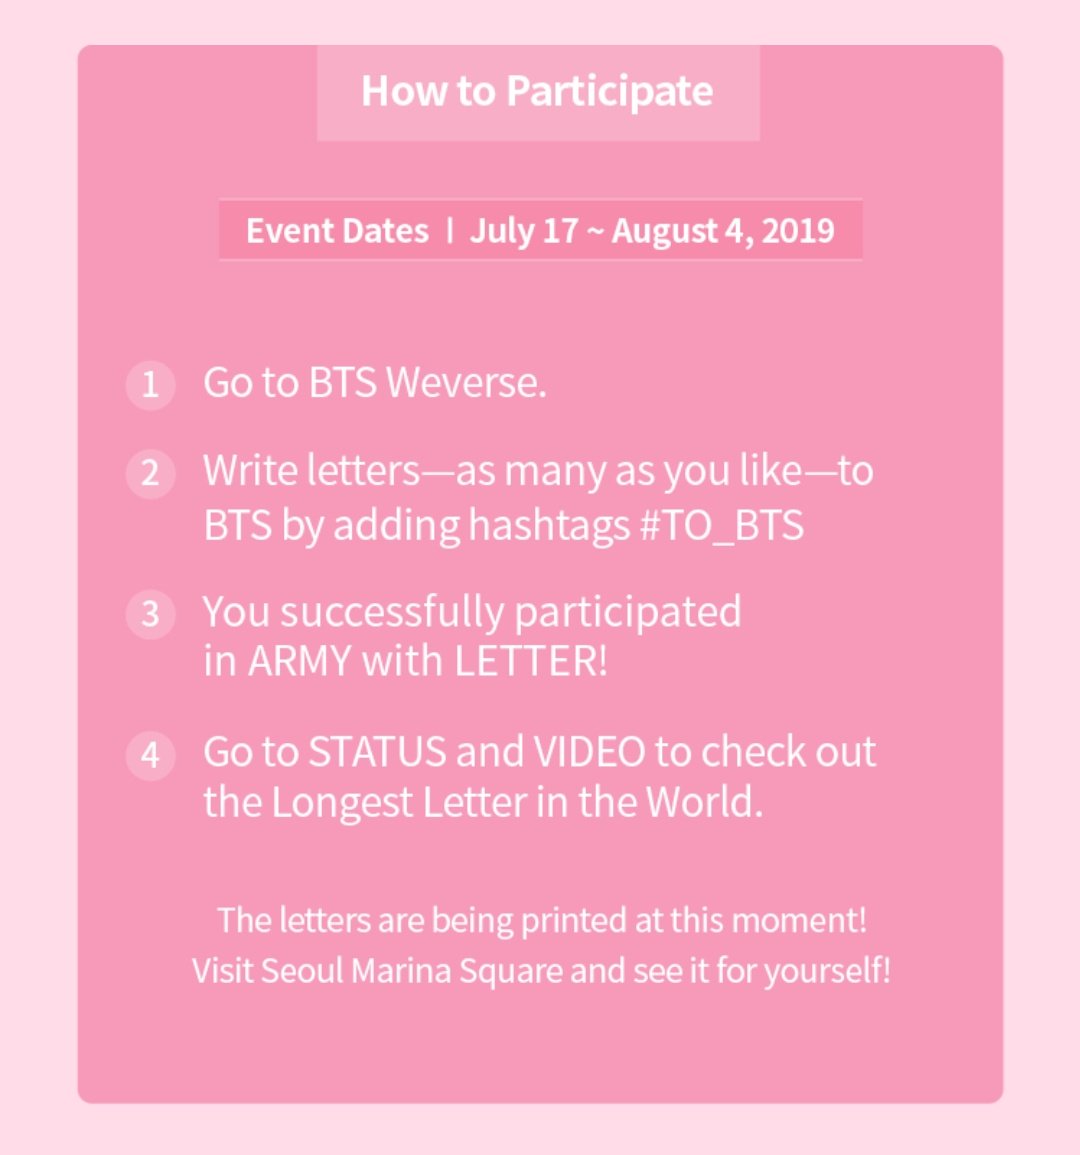 Info/Weverse] ARMY with LETTER